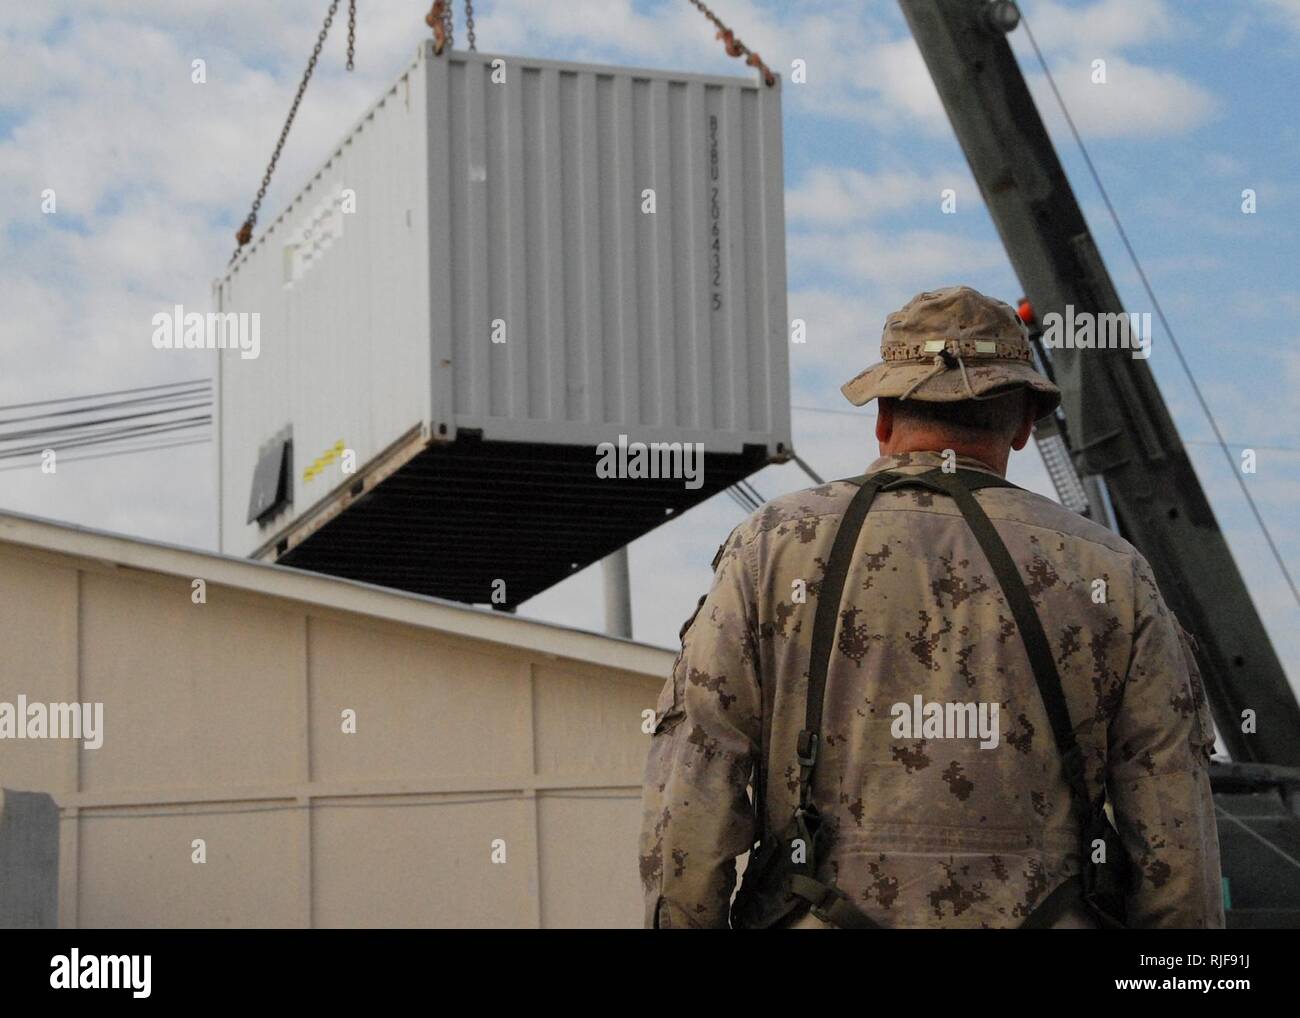 KANDAHAR, Afghanistan--A Canadian soldier with the International Security Assistance Force Regional Command South Engineers oversees a crane operation as it sets down a power supply container that was occupying the space where a new medical operation facility will be put in place at the ROLE 3 Hospital near Kandahar Air Field on February 3, 2008. The one-day project is a joint venture with the Task Forces operating in the ISAF RC South area of operation. The new operation room is expected to be fully operational later in the week. ISAF Stock Photo